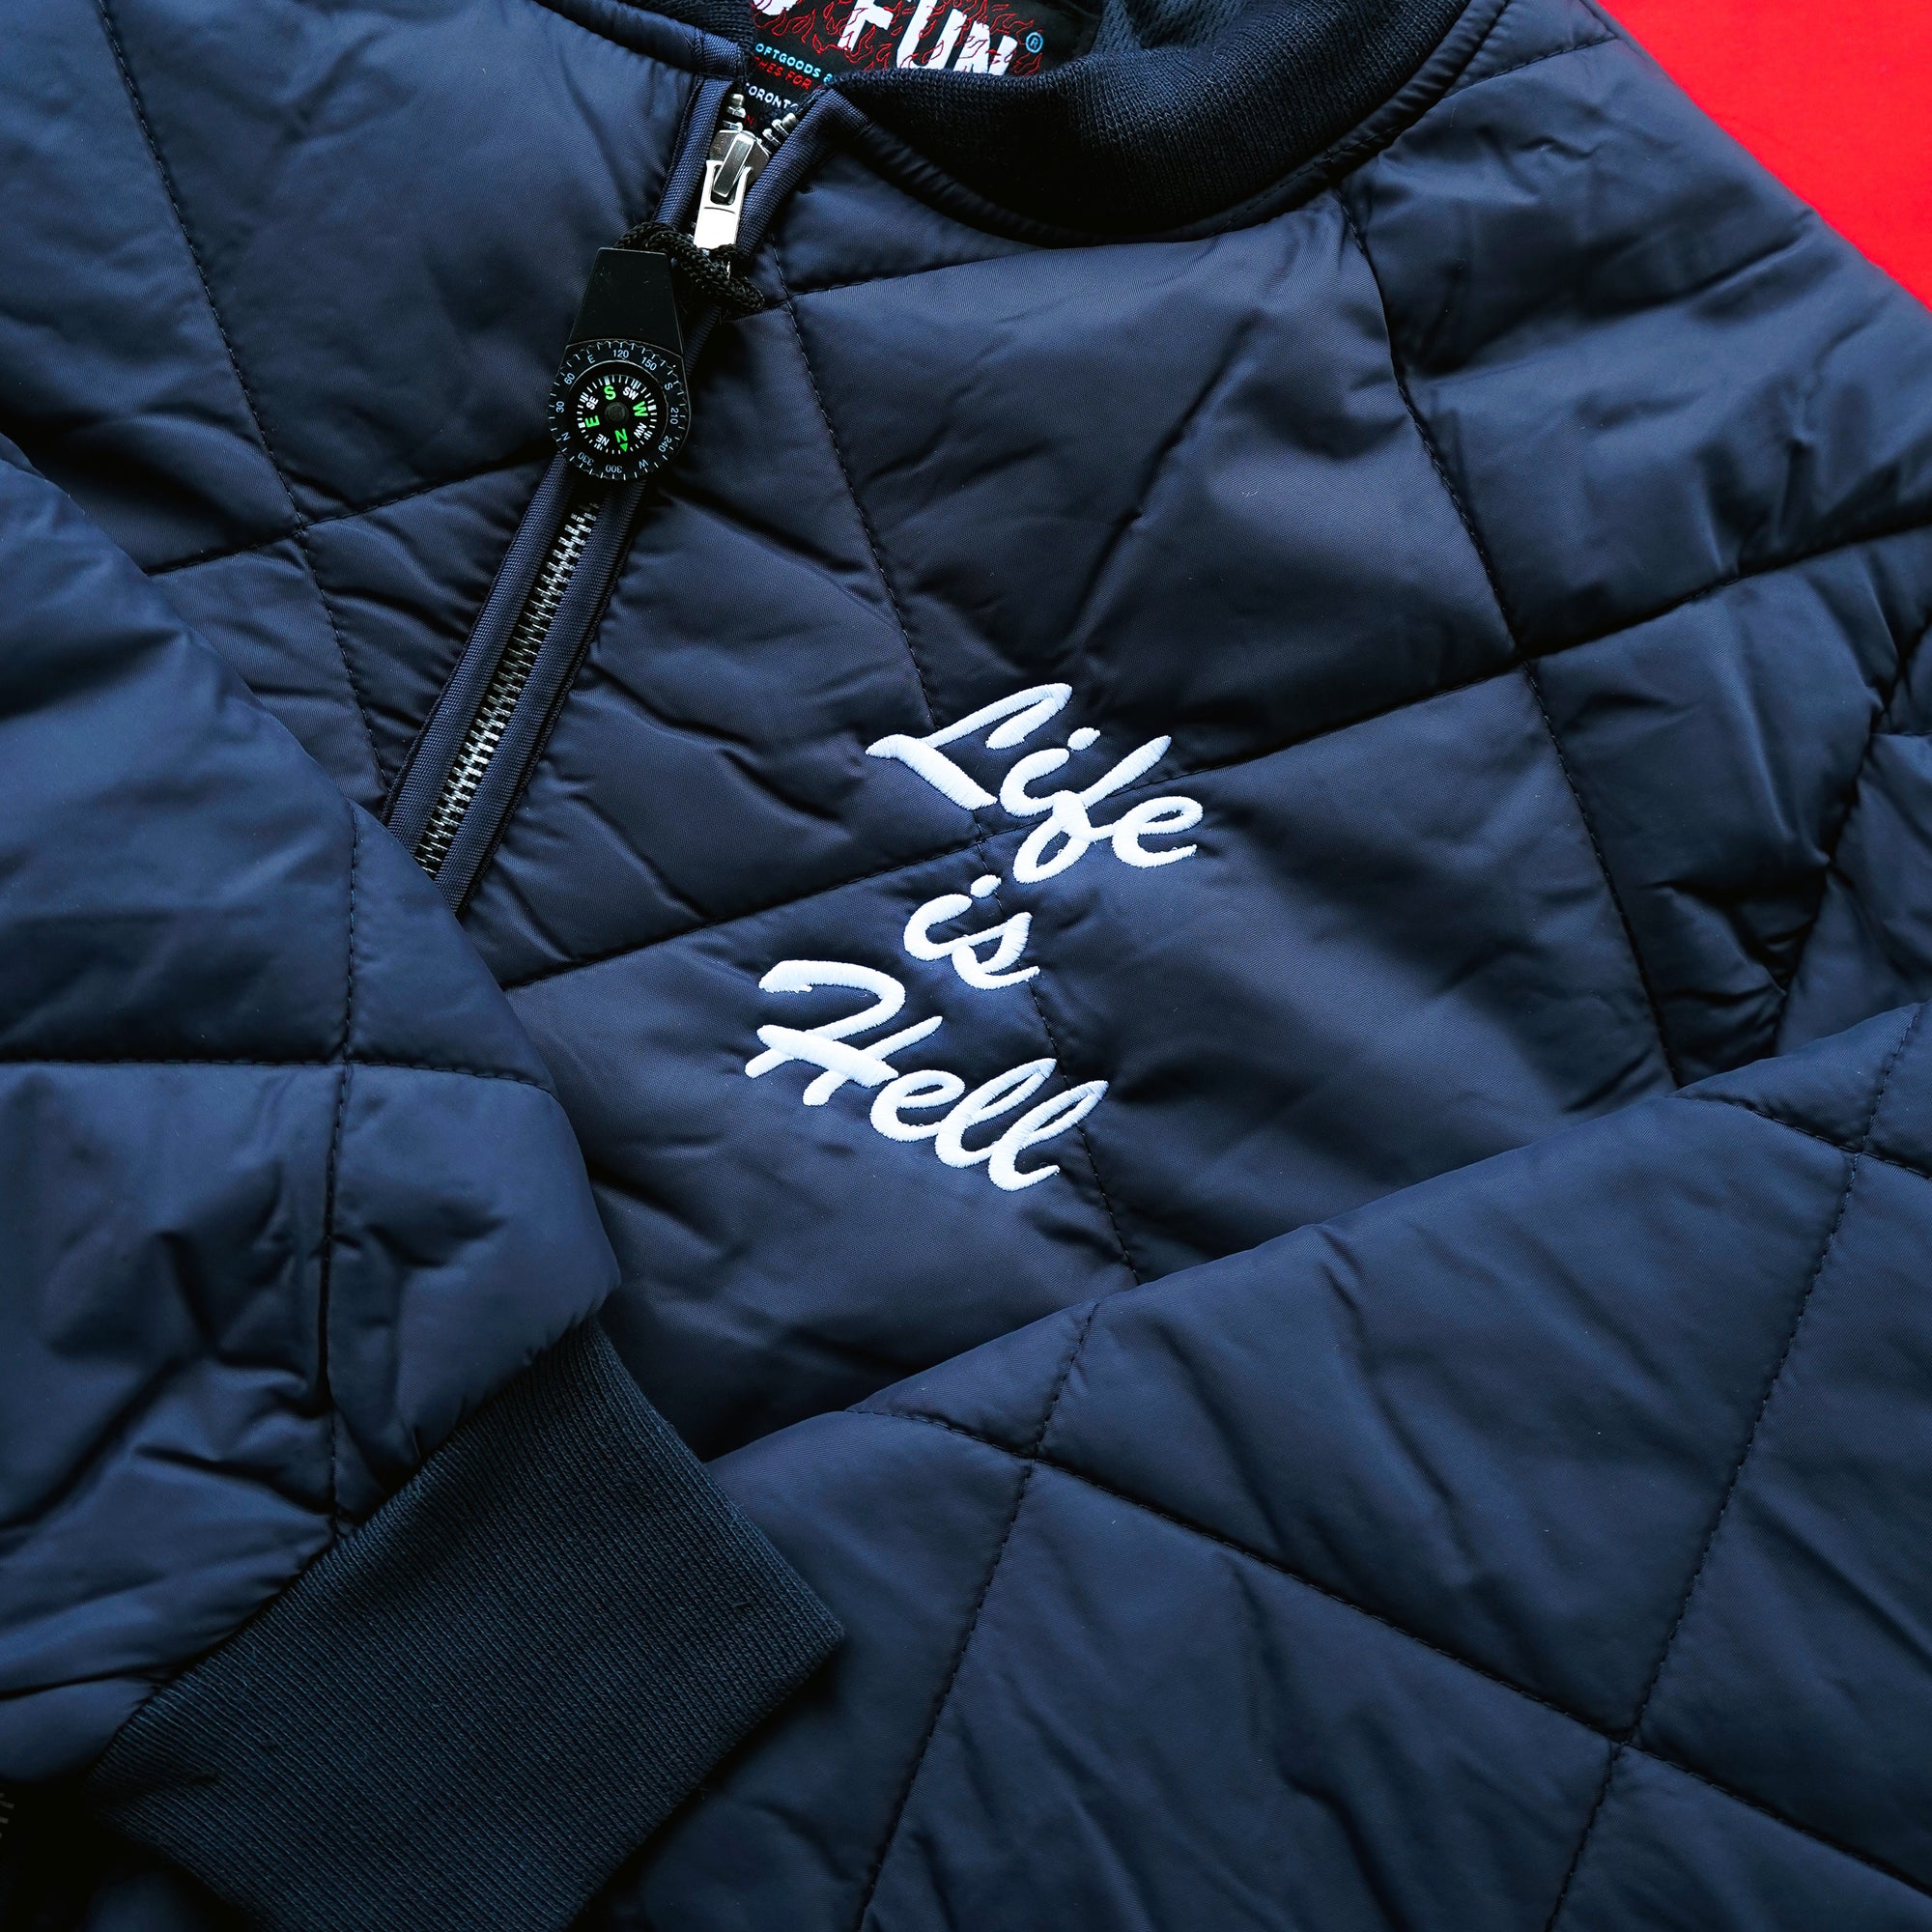 Product photo of the official No Fun® "Life Is Hell" Quilted Bomber Jacket in the navy colourway. The product is photographed on a red background, with the sleeves of the jacket folded over. The jacket features the text "Life Is Hell" embroidered on the front of the jacket in white. The jacket also features a zipper on the front, and full quilting on the entire outer shell.